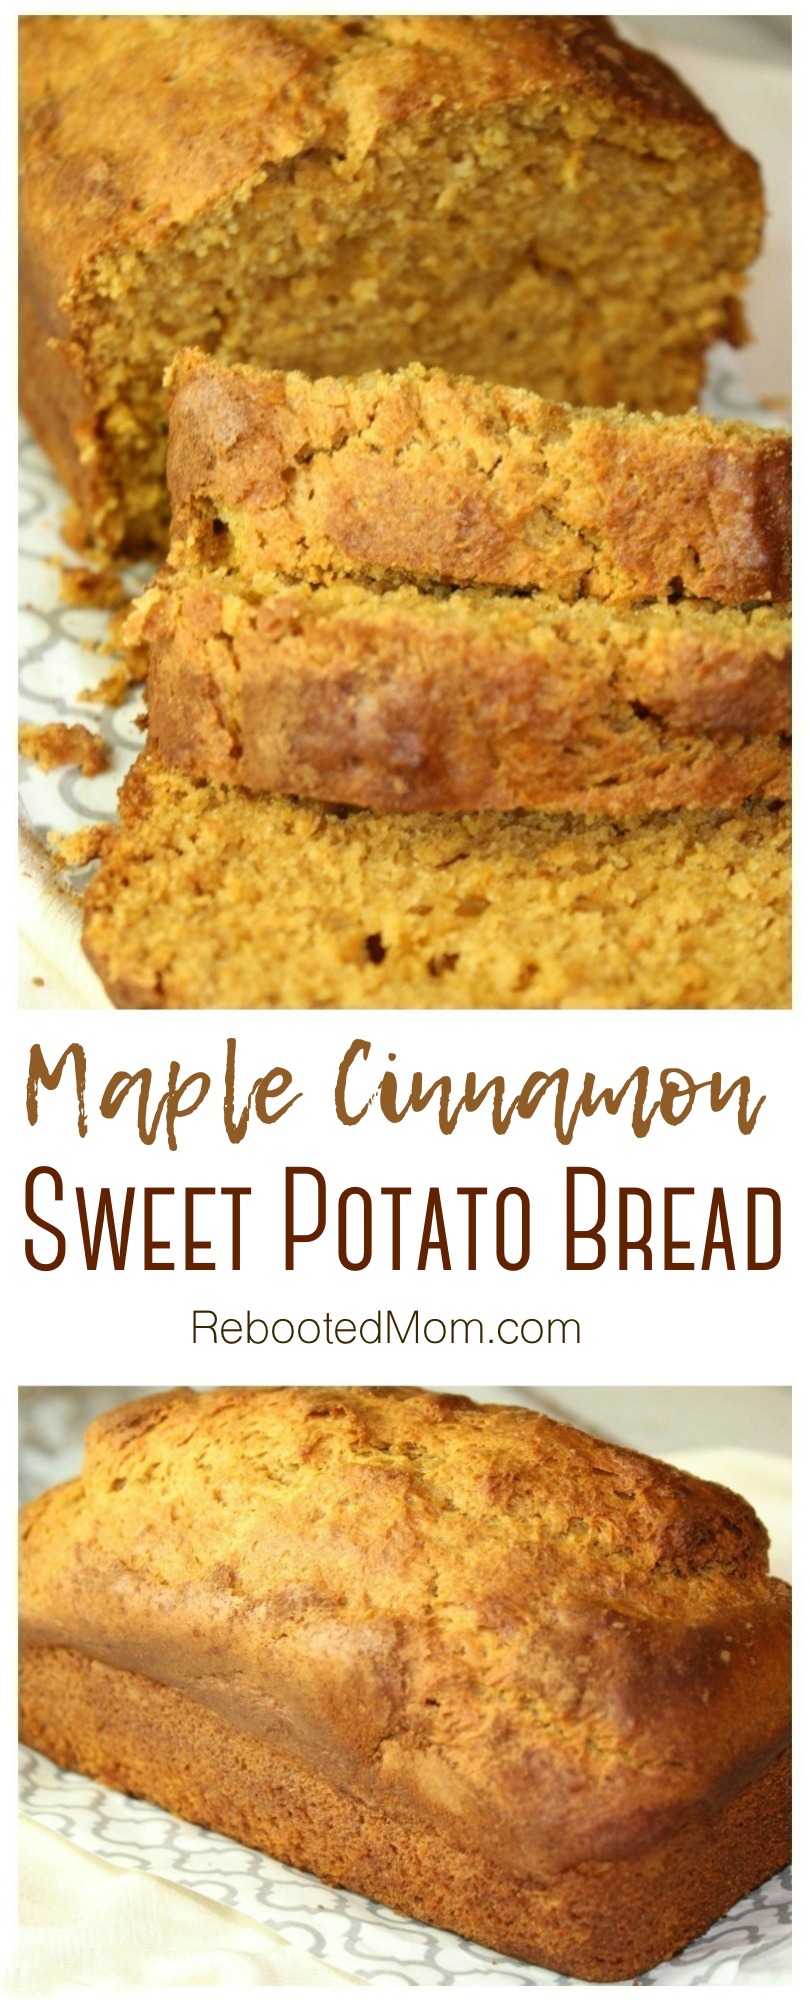 Our maple sweet potato bread blurs the line between breakfast and dessert & combines subtle spices of maple syrup, and sweet potatoes into one yummy loaf.